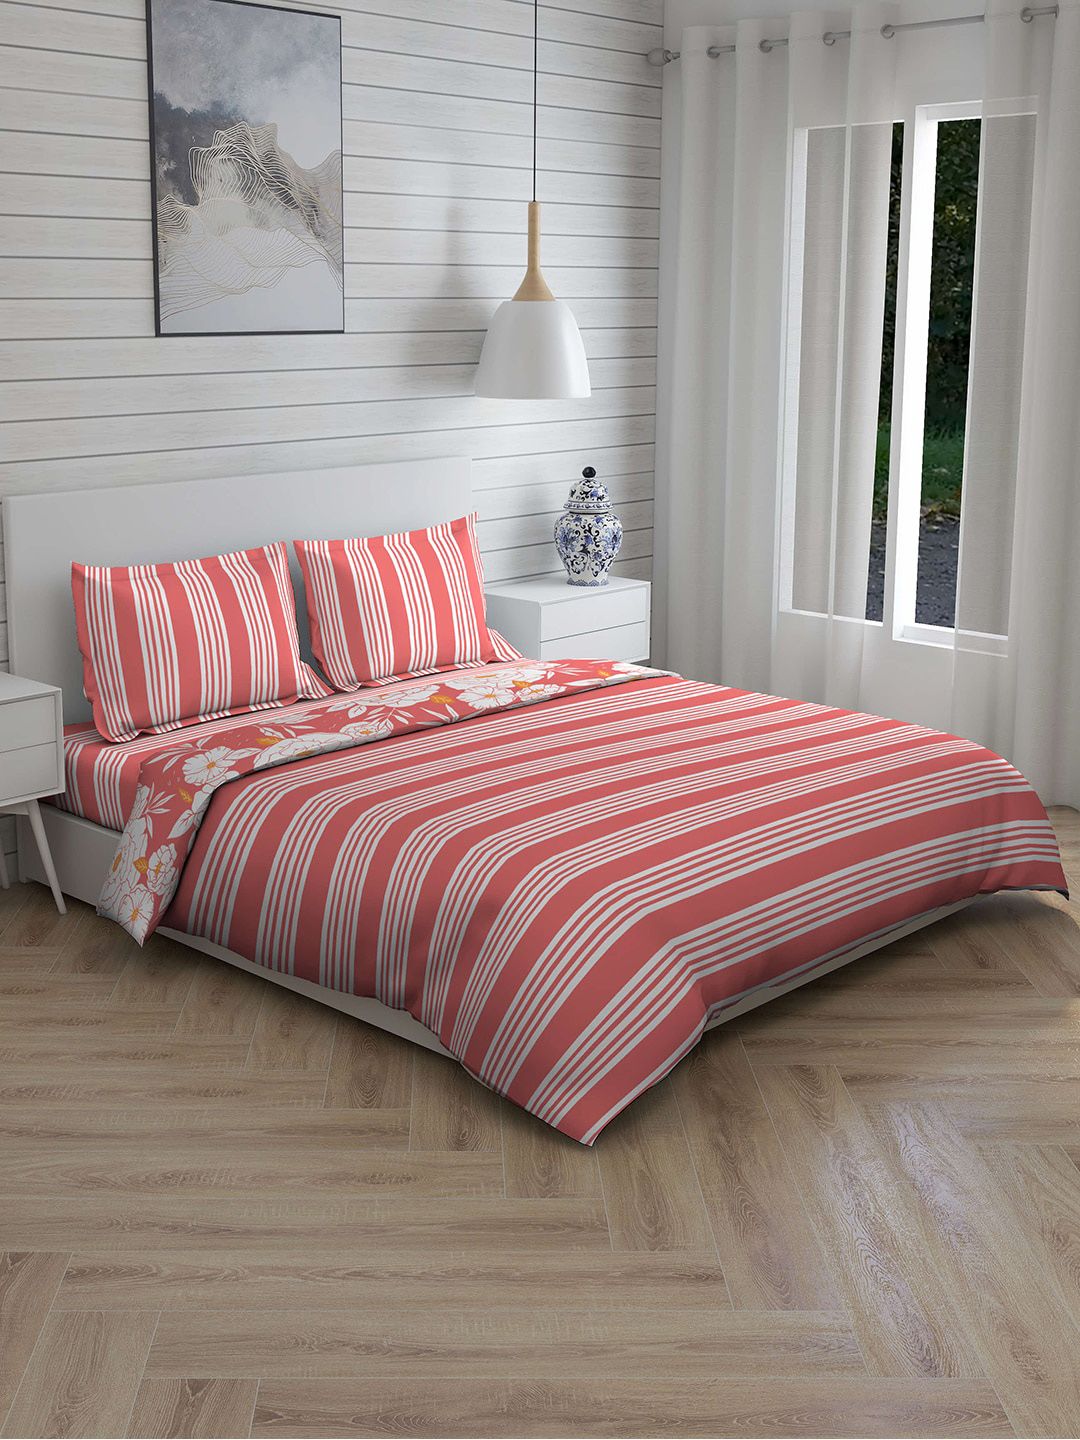 Boutique Living India Coral Pink & White Striped 148 TC 120 GSM Double King Bedding Set Price in India